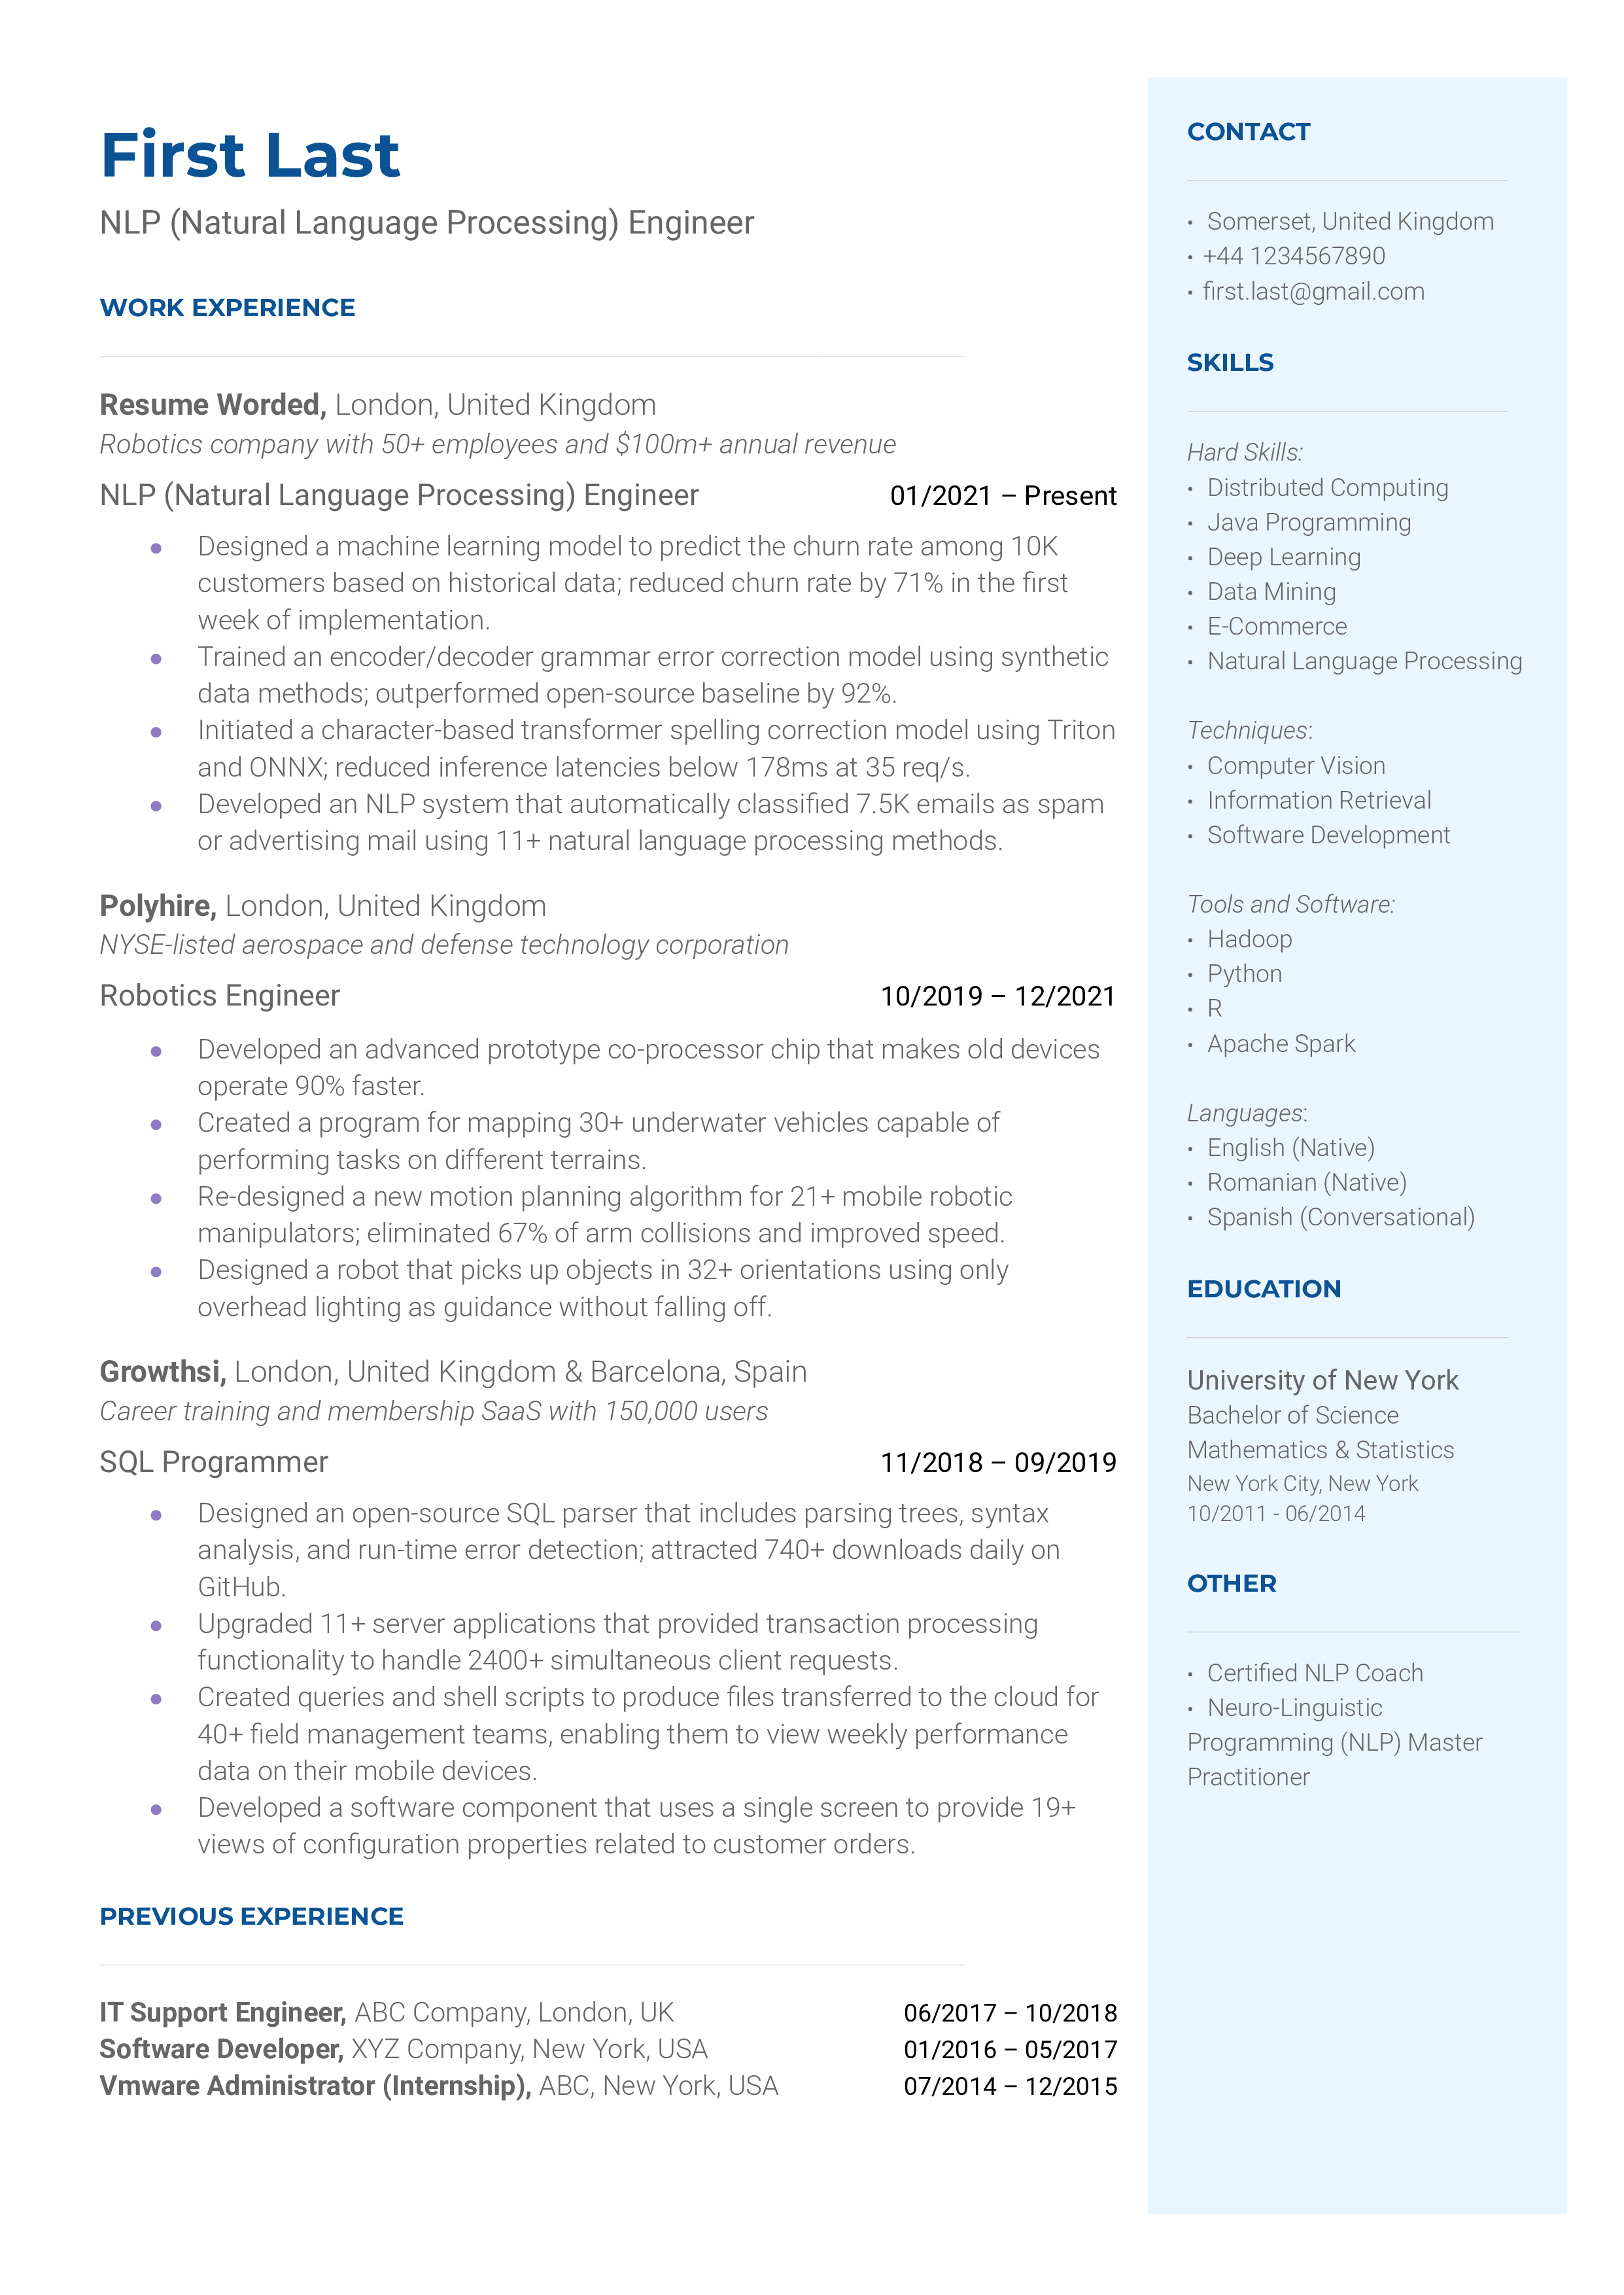 Screenshot of a CV for an NLP Engineer role, featuring experience, technical skills, and relevant projects.